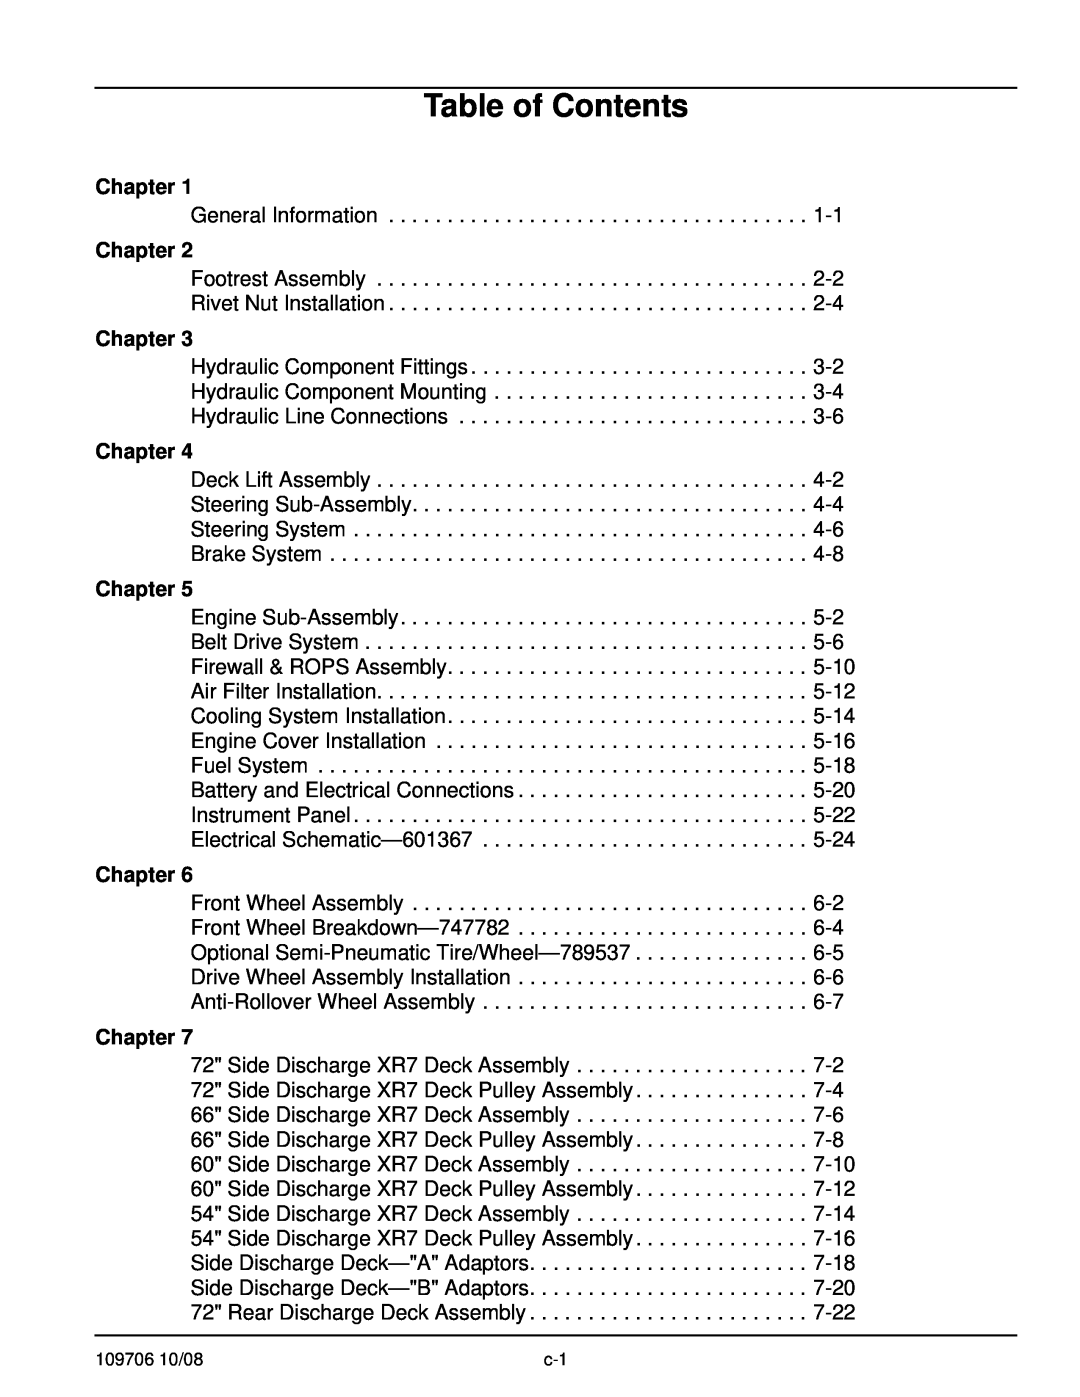 Hustler Turf Diesel Z manual Table of Contents, Chapter 